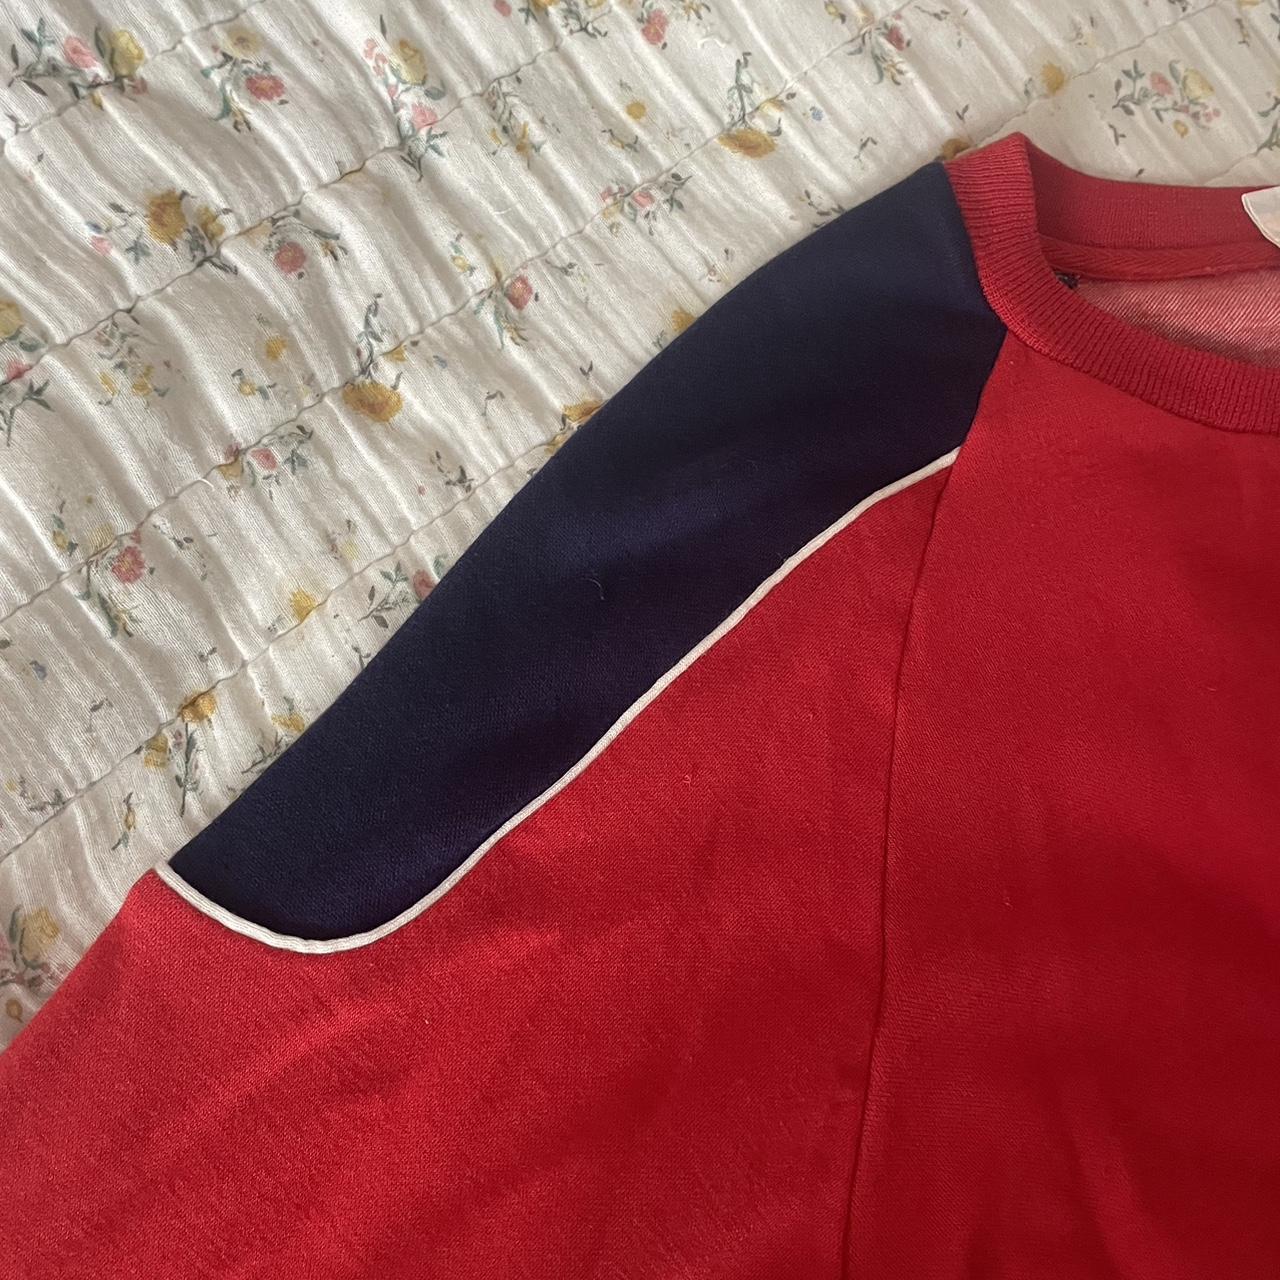 Converse Men's Red and Navy Jumper (4)